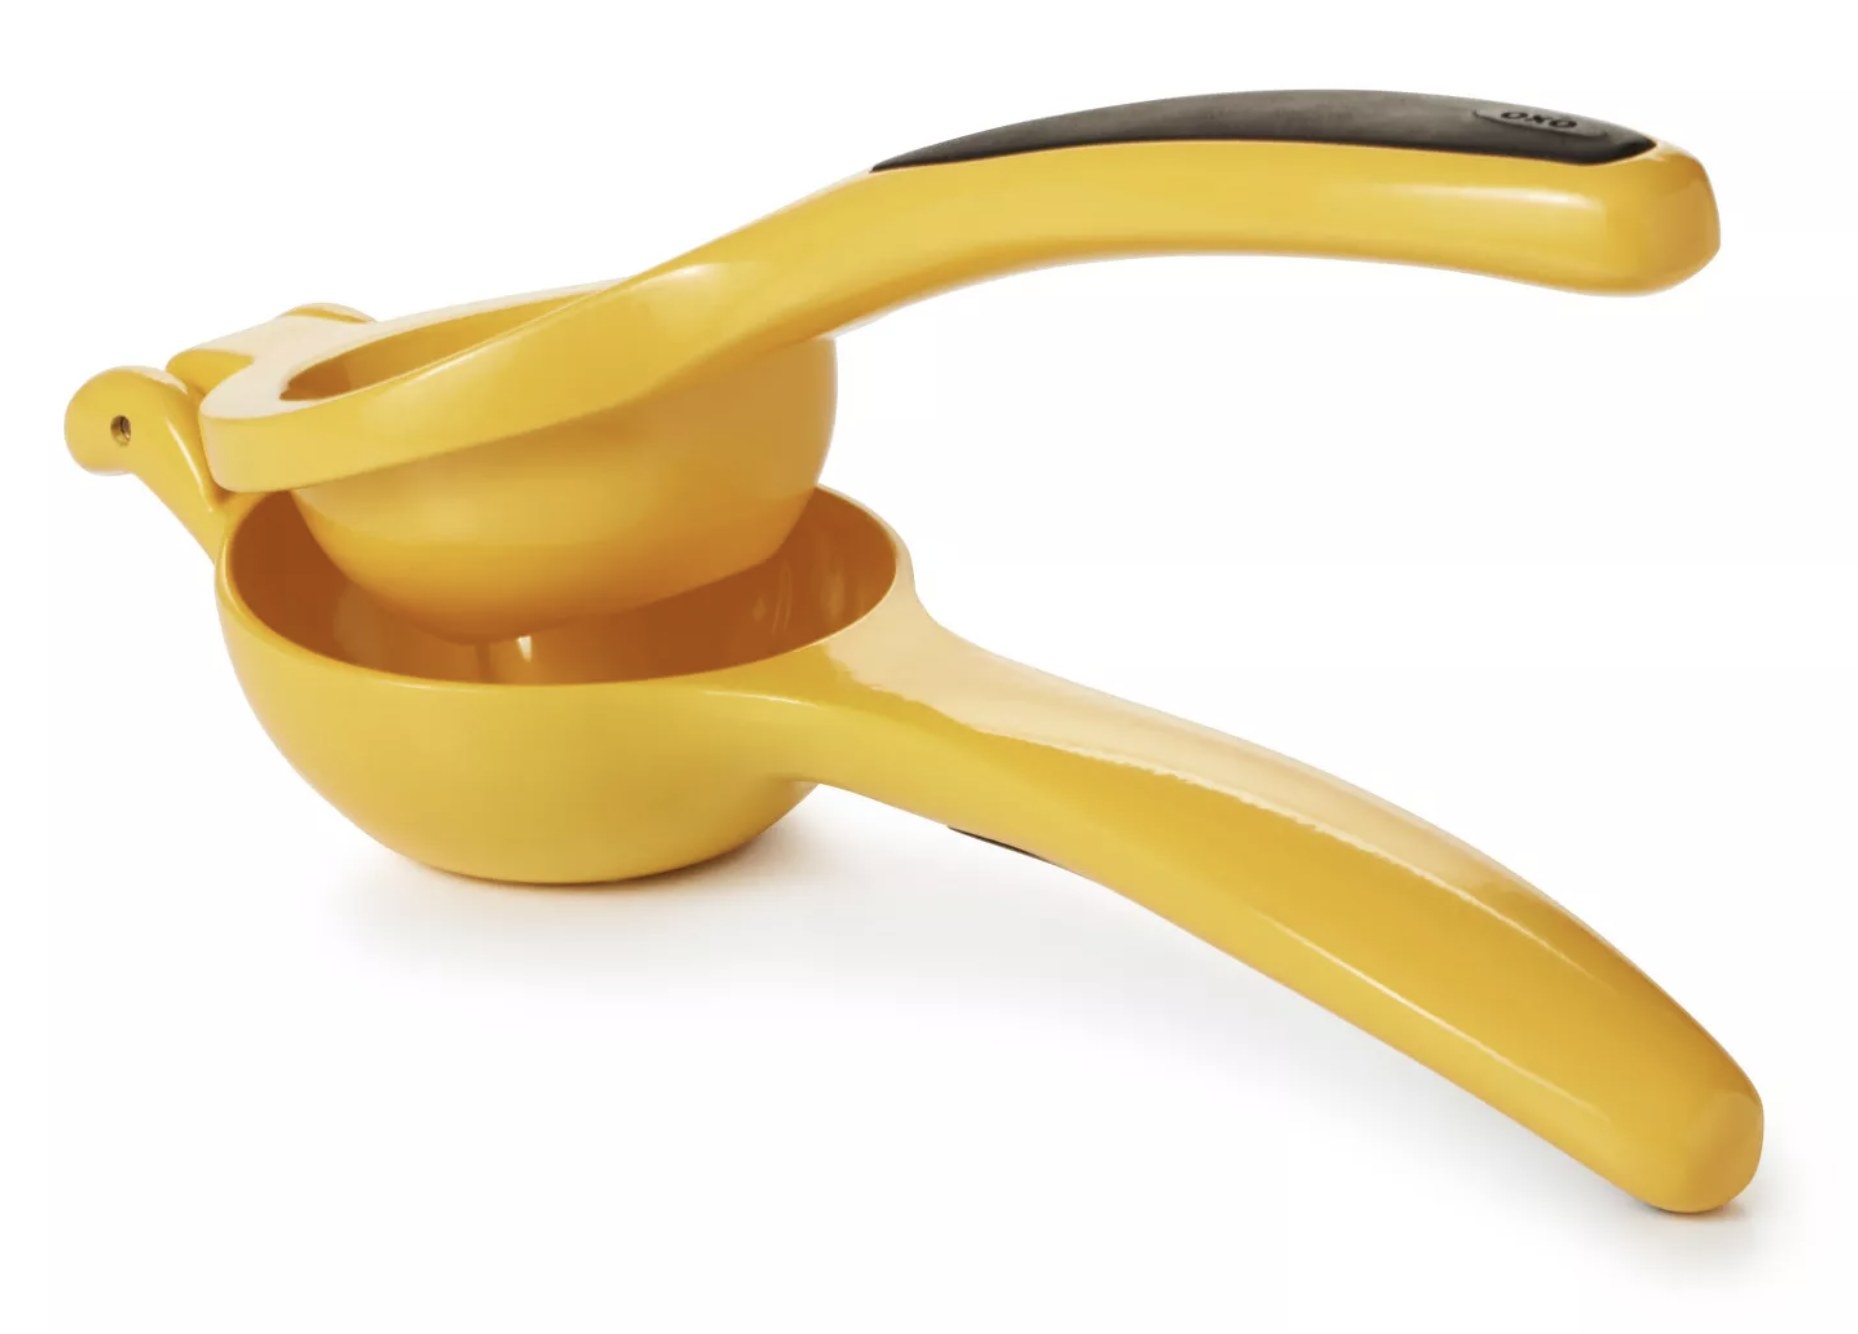 a yellow citrus squeezer with a black softgrip